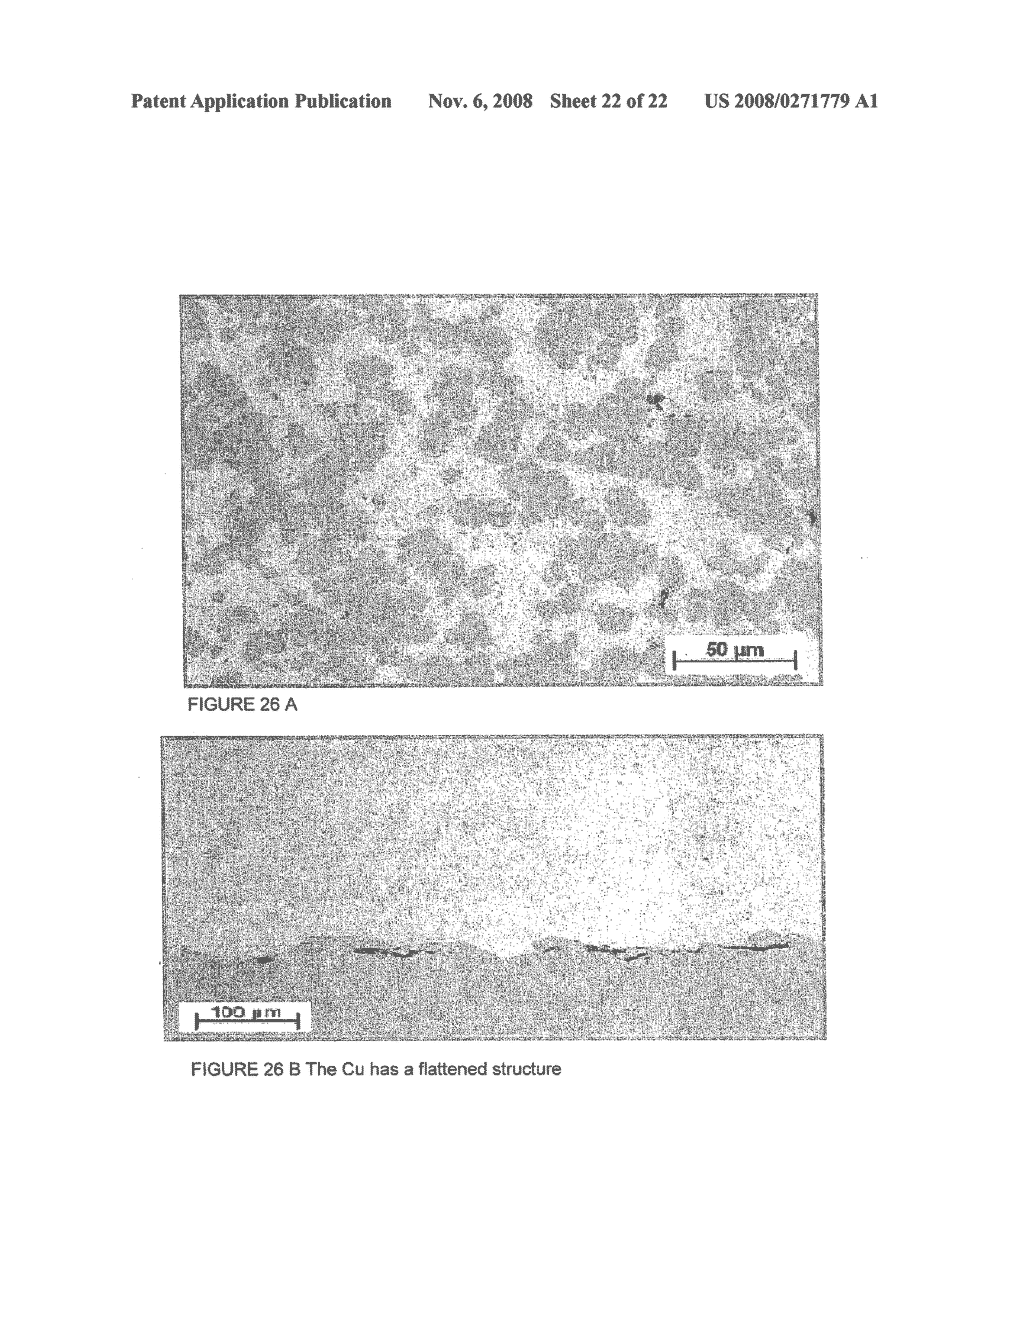 Fine Grained, Non Banded, Refractory Metal Sputtering Targets with a Uniformly Random Crystallographic Orientation, Method for Making Such Film, and Thin Film Based Devices and Products Made Therefrom - diagram, schematic, and image 23